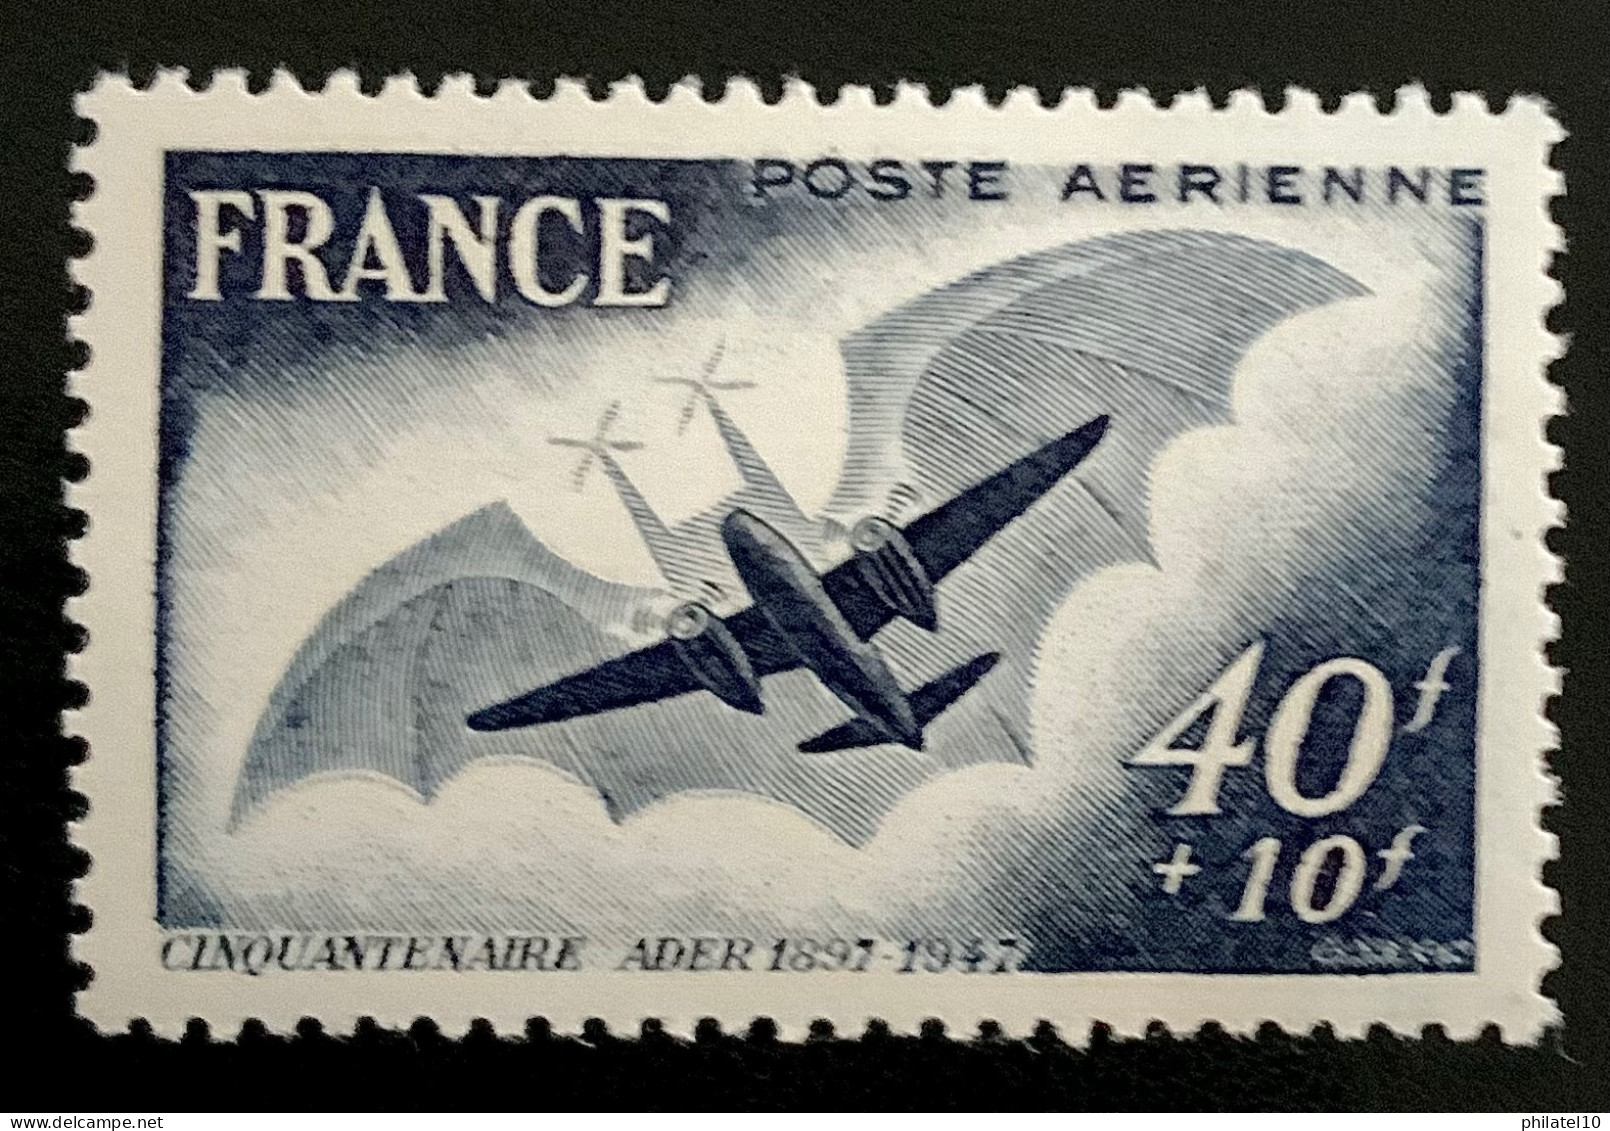 1948 FRANCE N 23 POSTE AERIENNE CINQUANTENAIRE ADER - NEUF** - 1927-1959 Mint/hinged